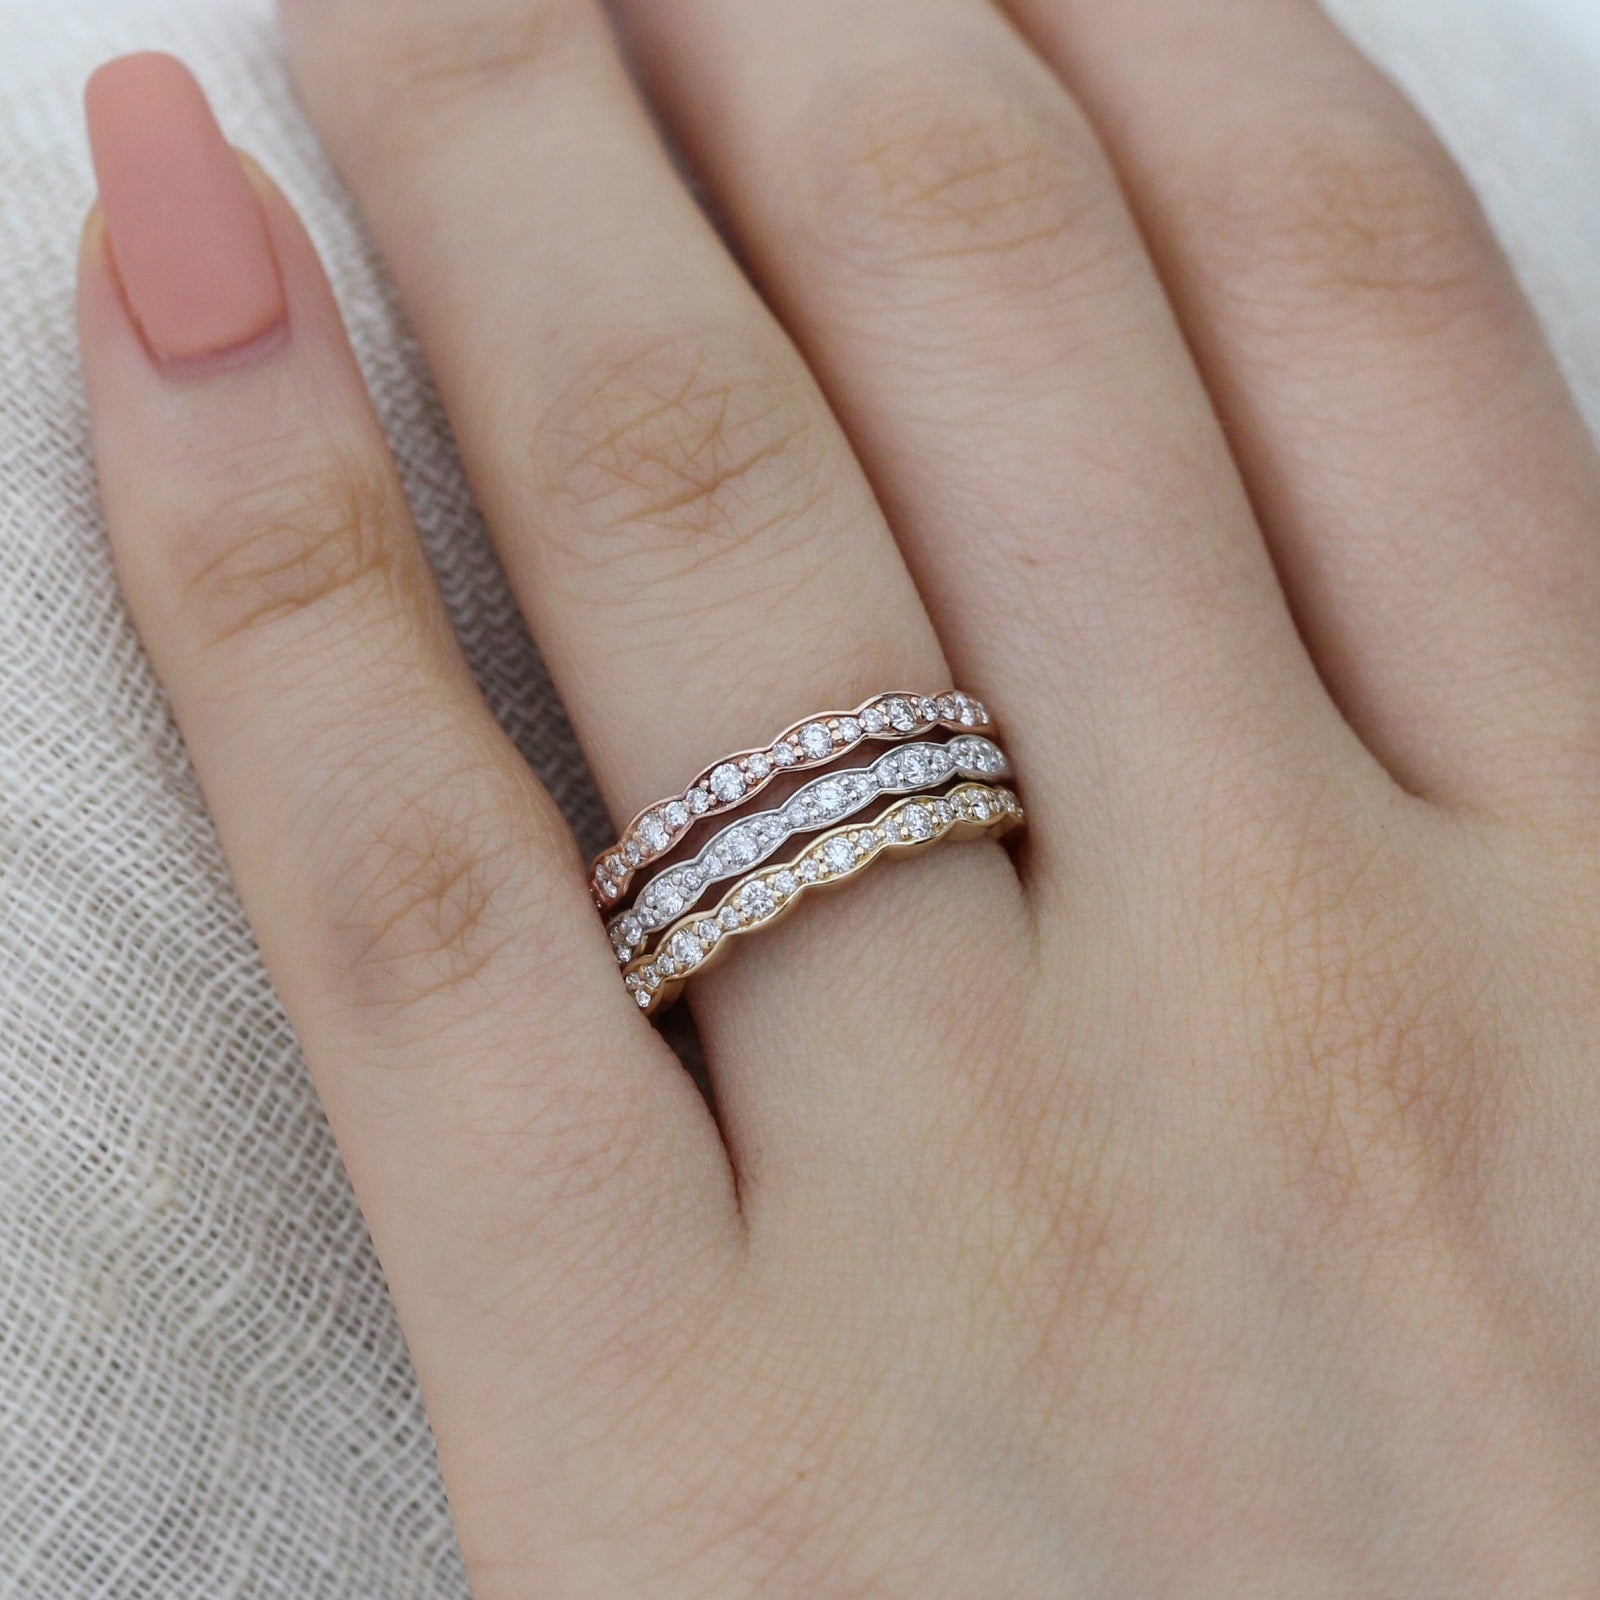 Scalloped diamond wedding band in rose gold white gold yellow gold by la more design